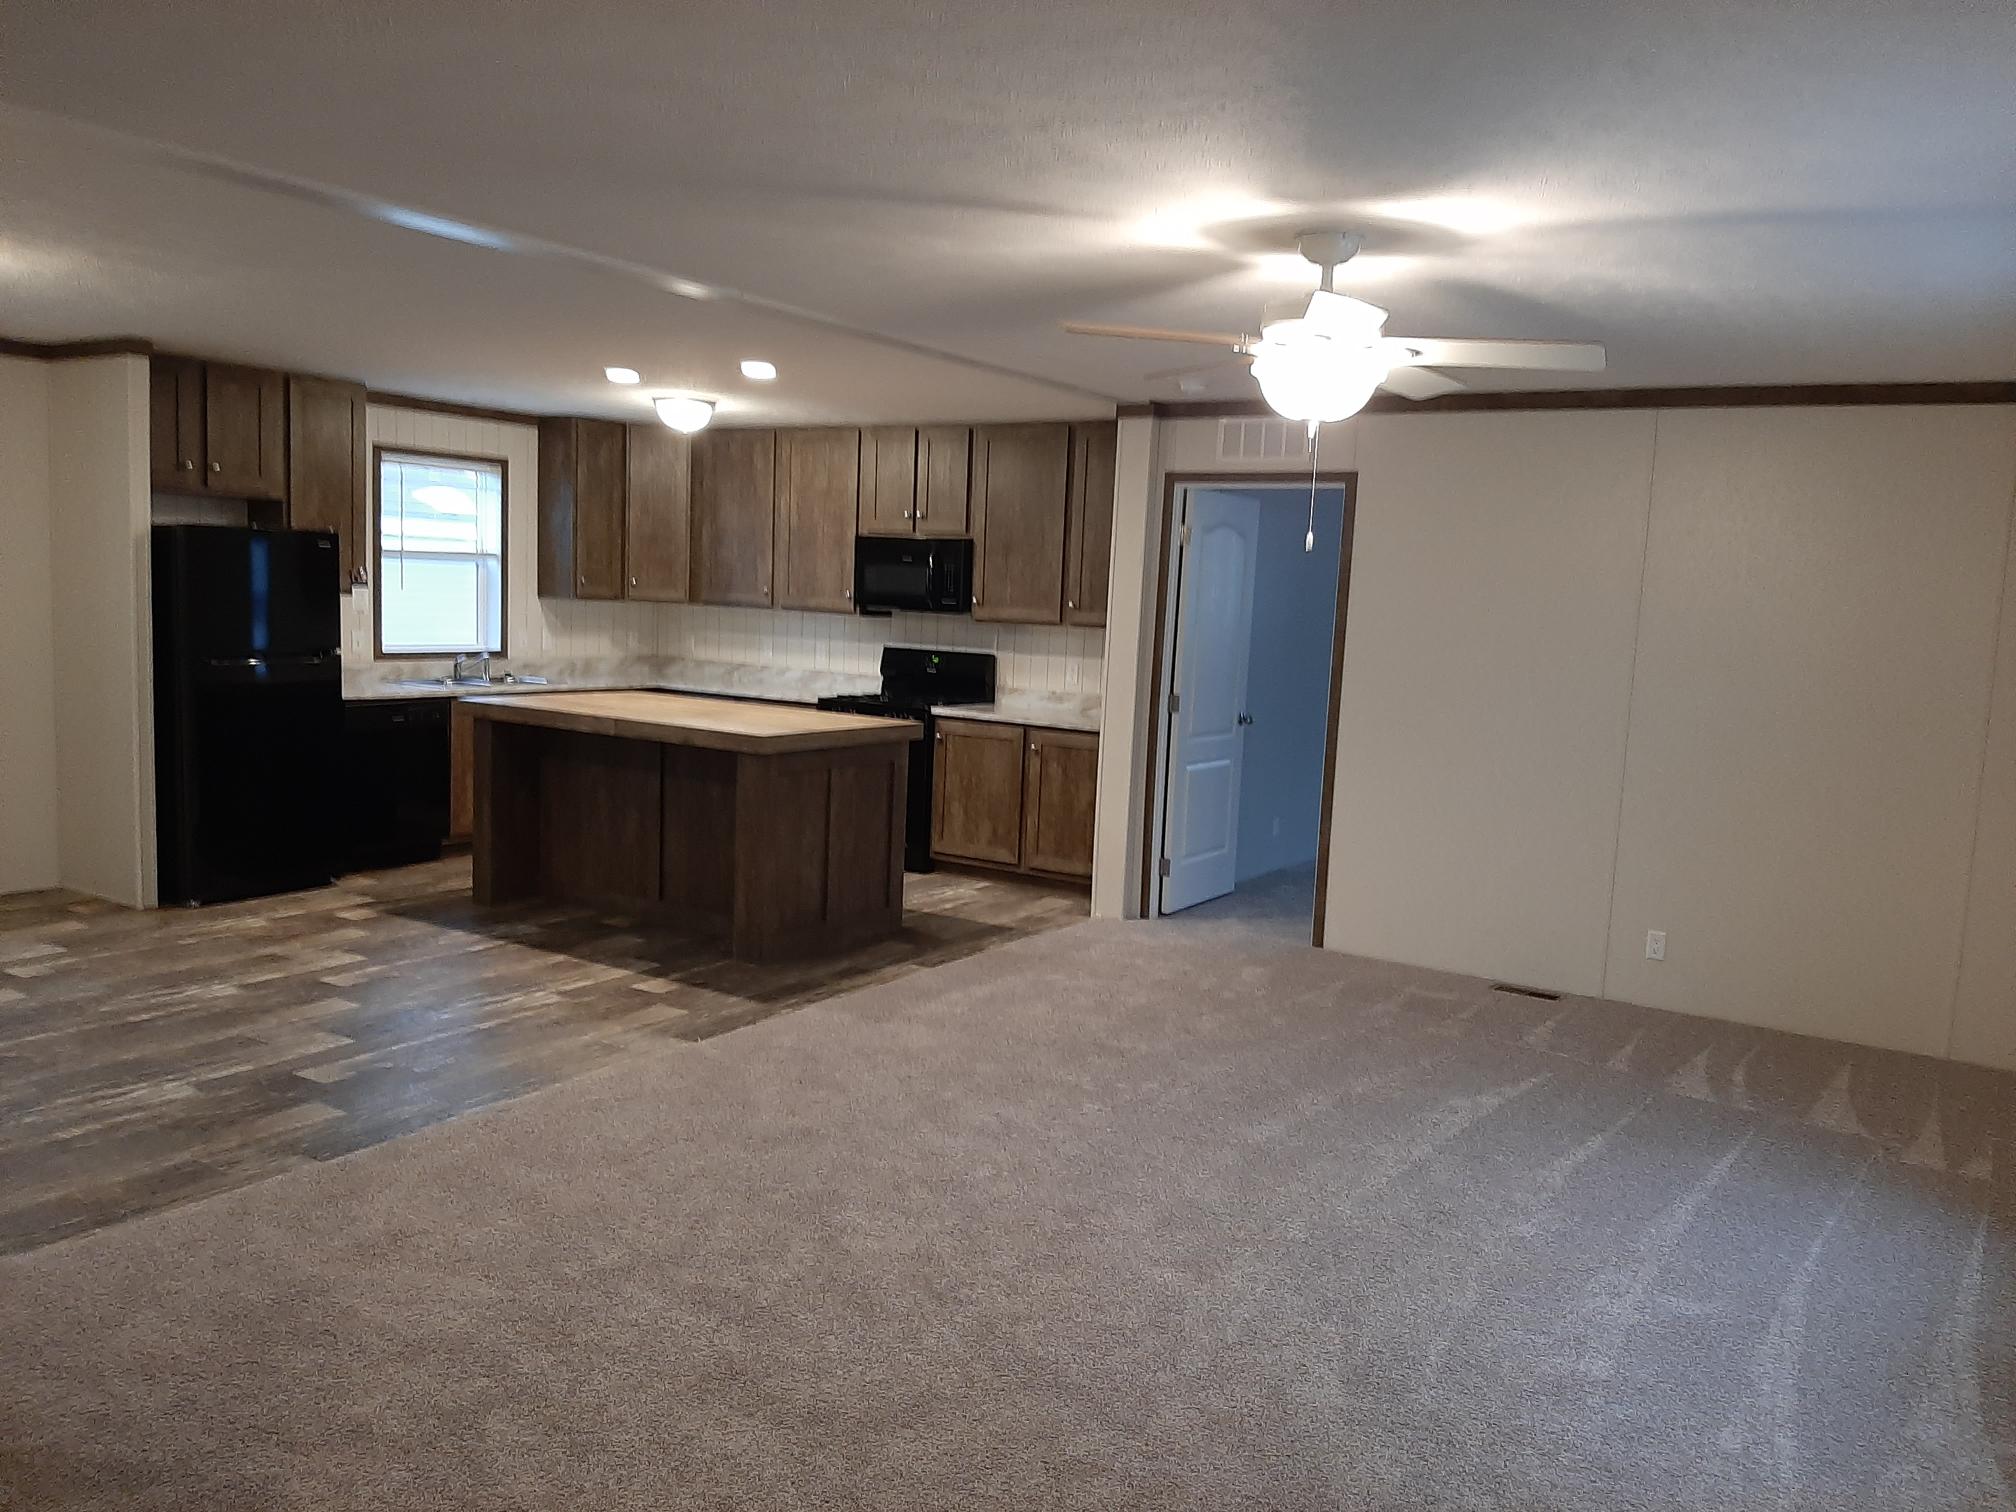 BRAND NEW HOME!! – DON’T MISS OUT!